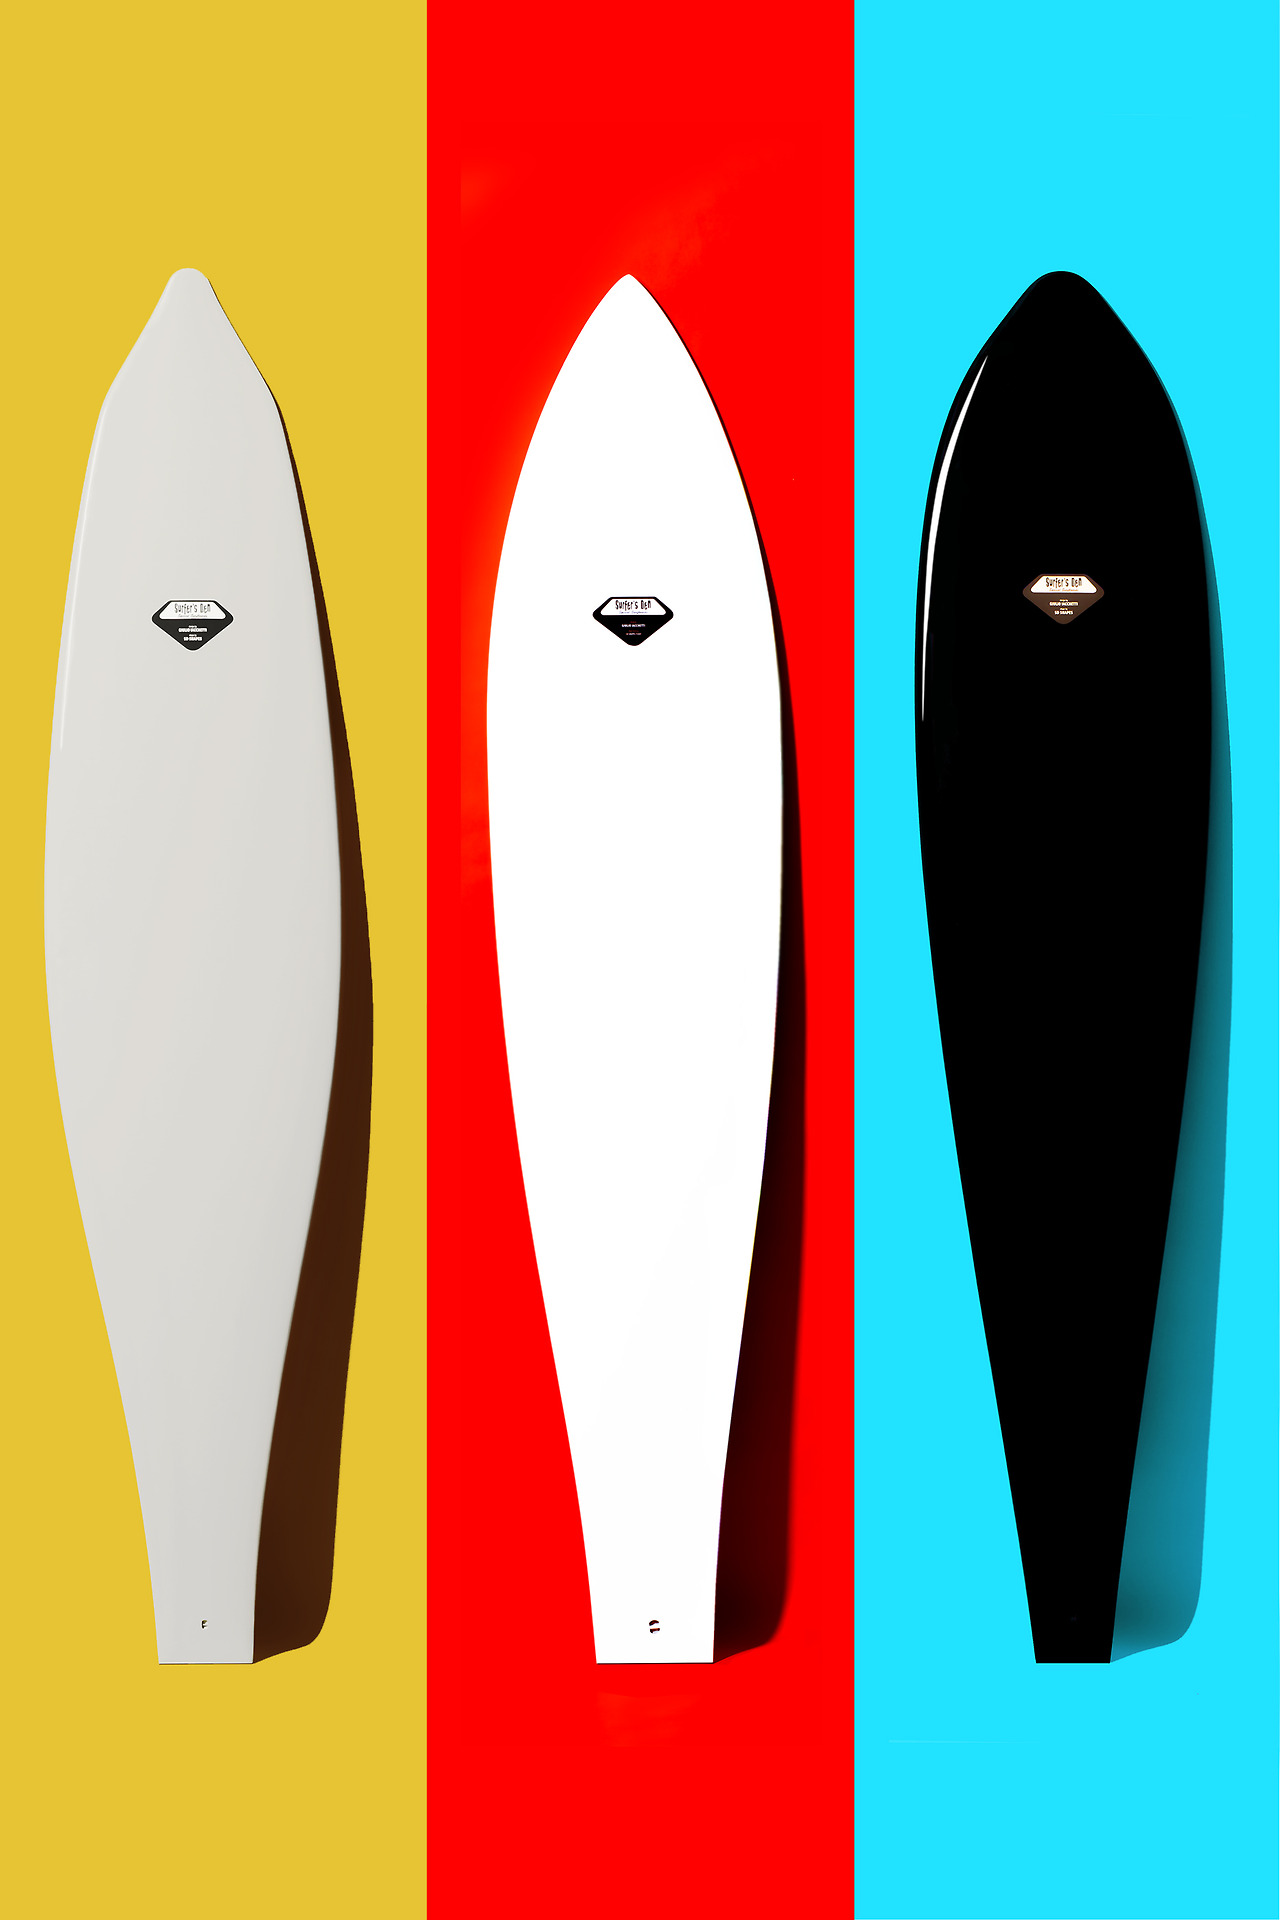 Surfboards for WIRED UK (2014)